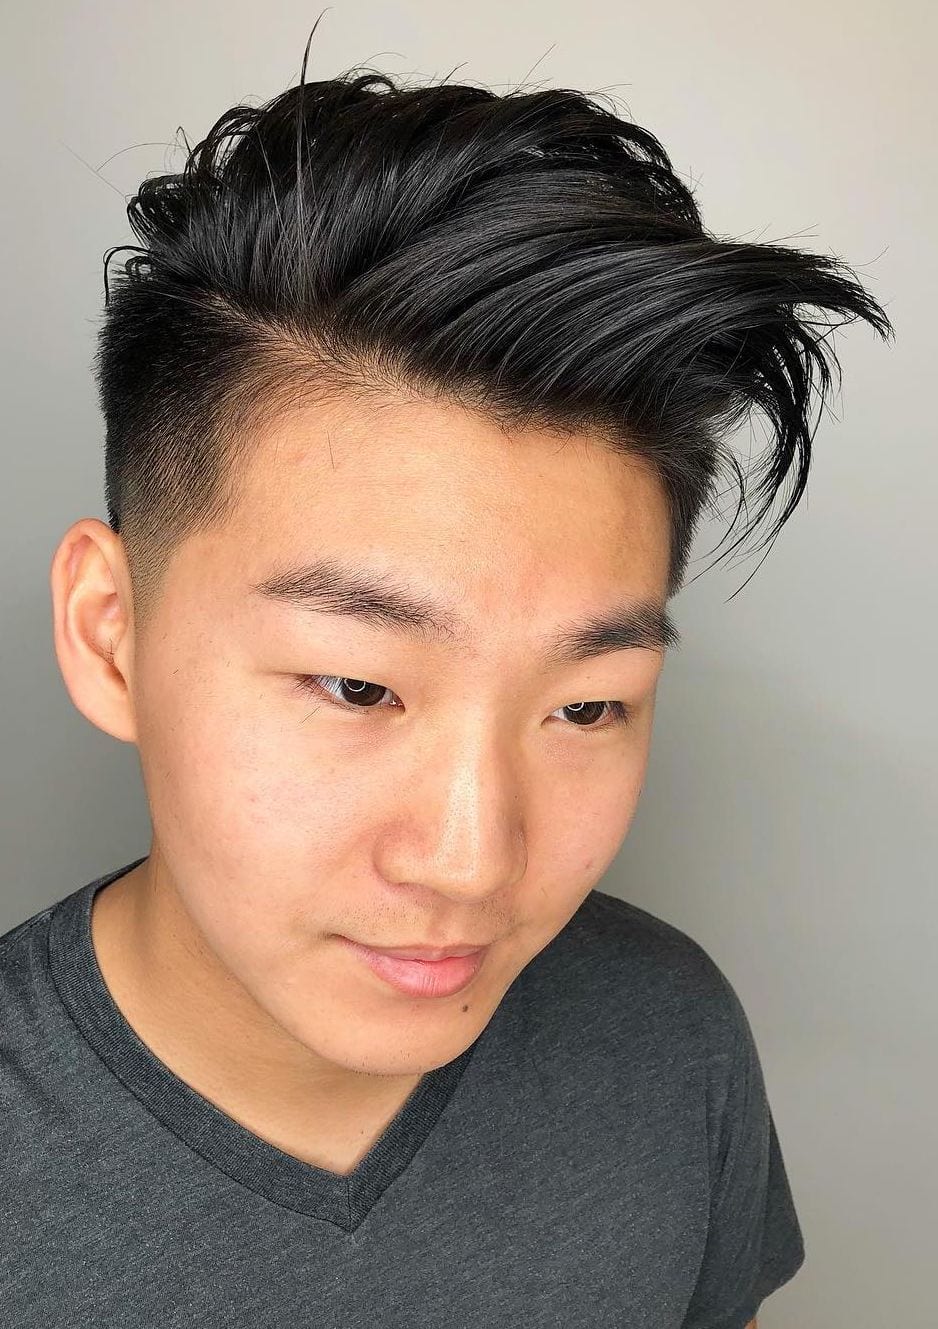 15 Popular And Edgy Asian Hairstyles For Men - Styleoholic